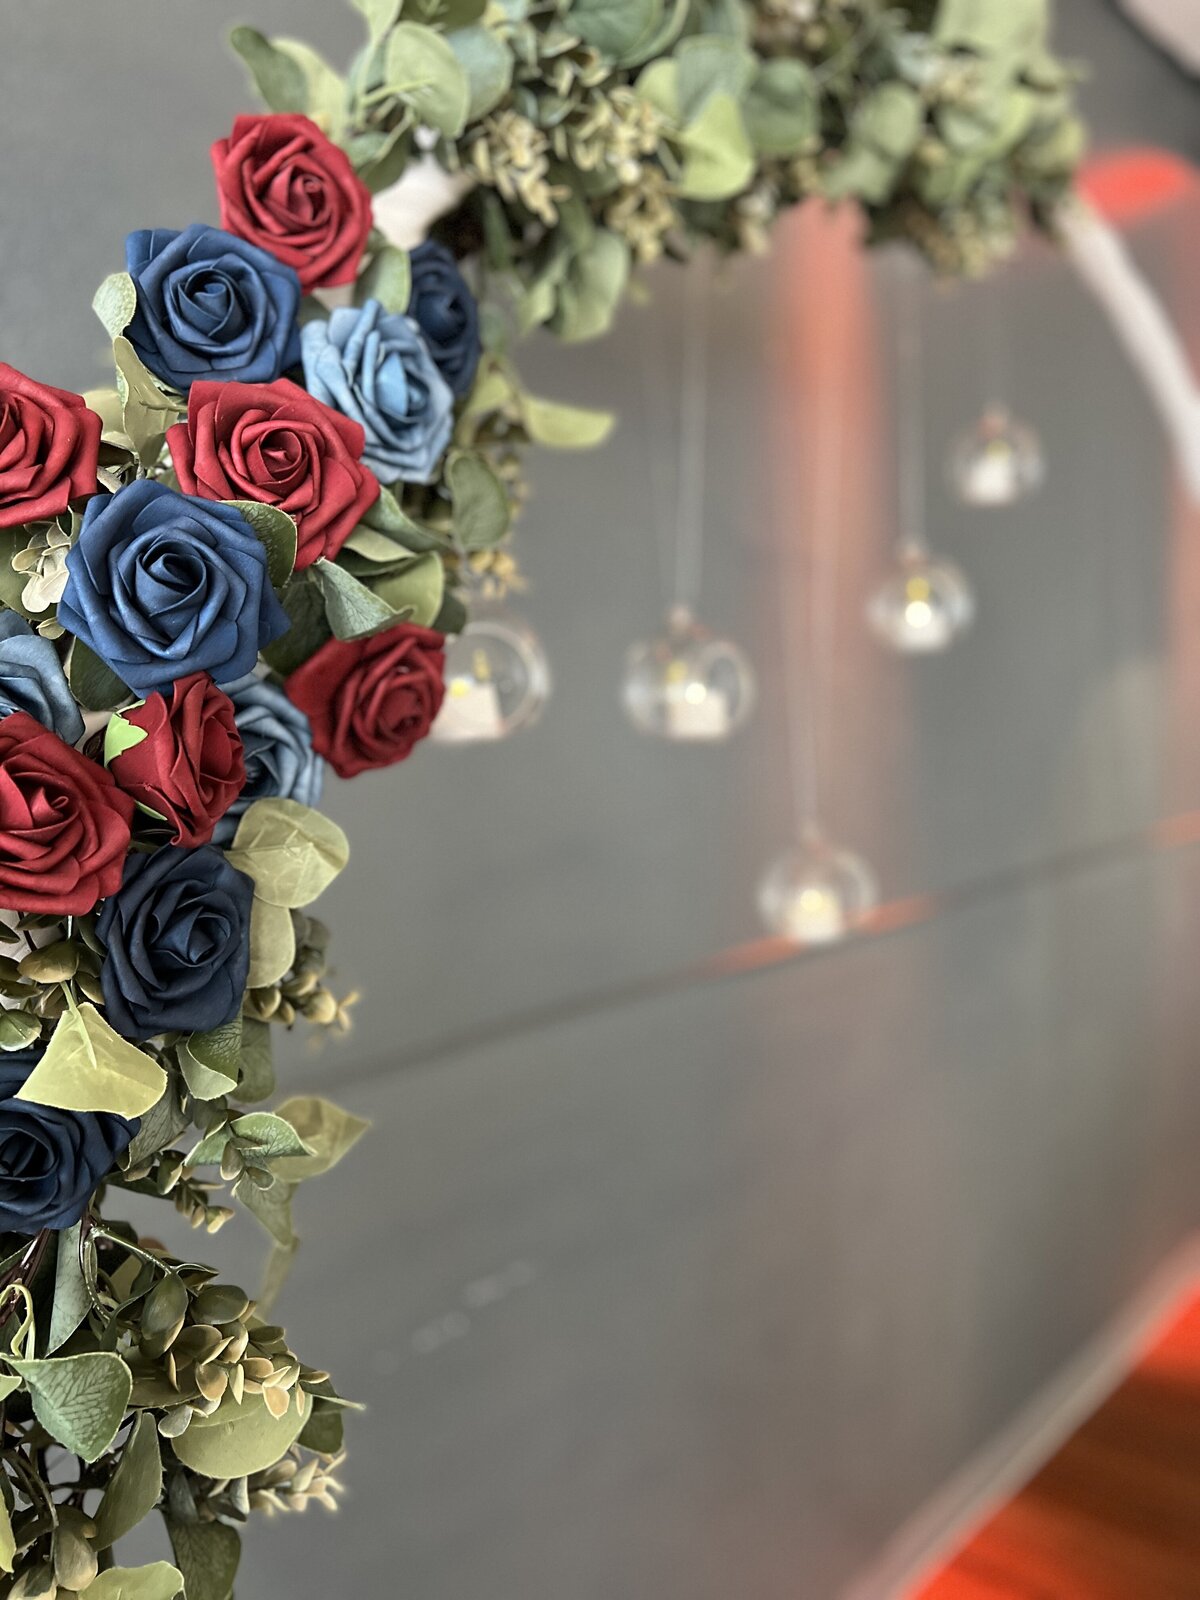 Timeless wedding circle arch adorned with roses and glass orbs - A captivating backdrop for traditions at The District, Clearwater, Florida